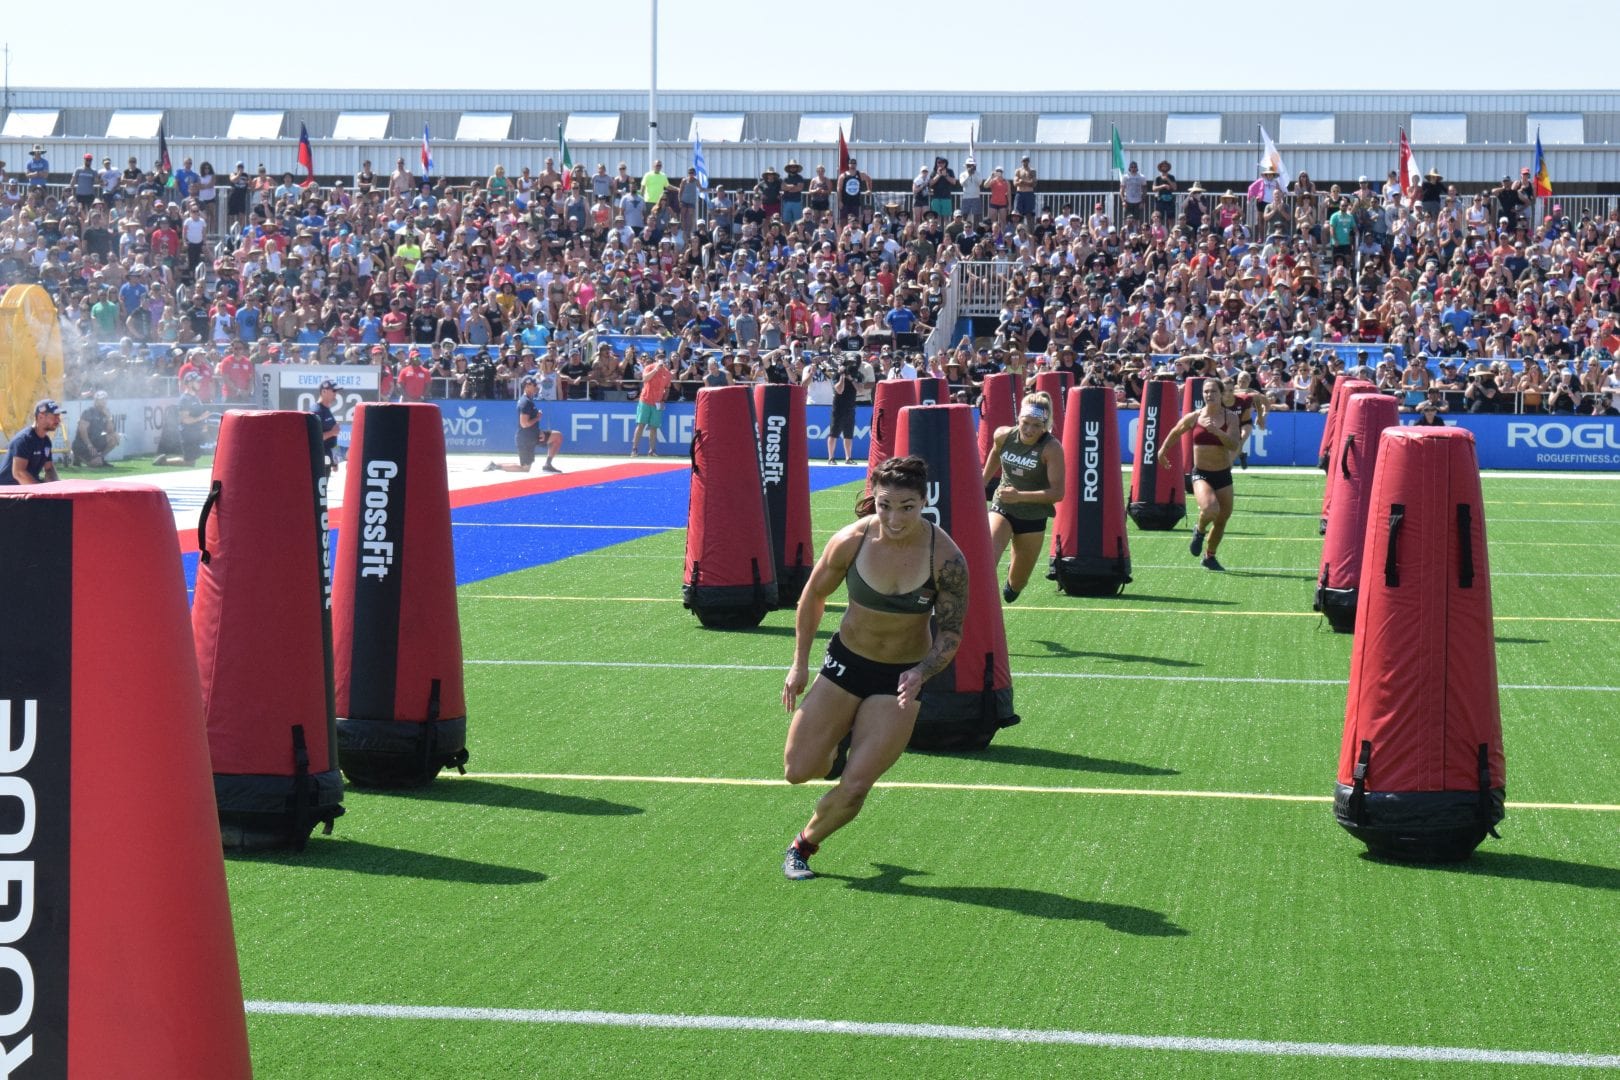 Bethany Shadburne completes the Sprint event at the 2019 CrossFit Games.